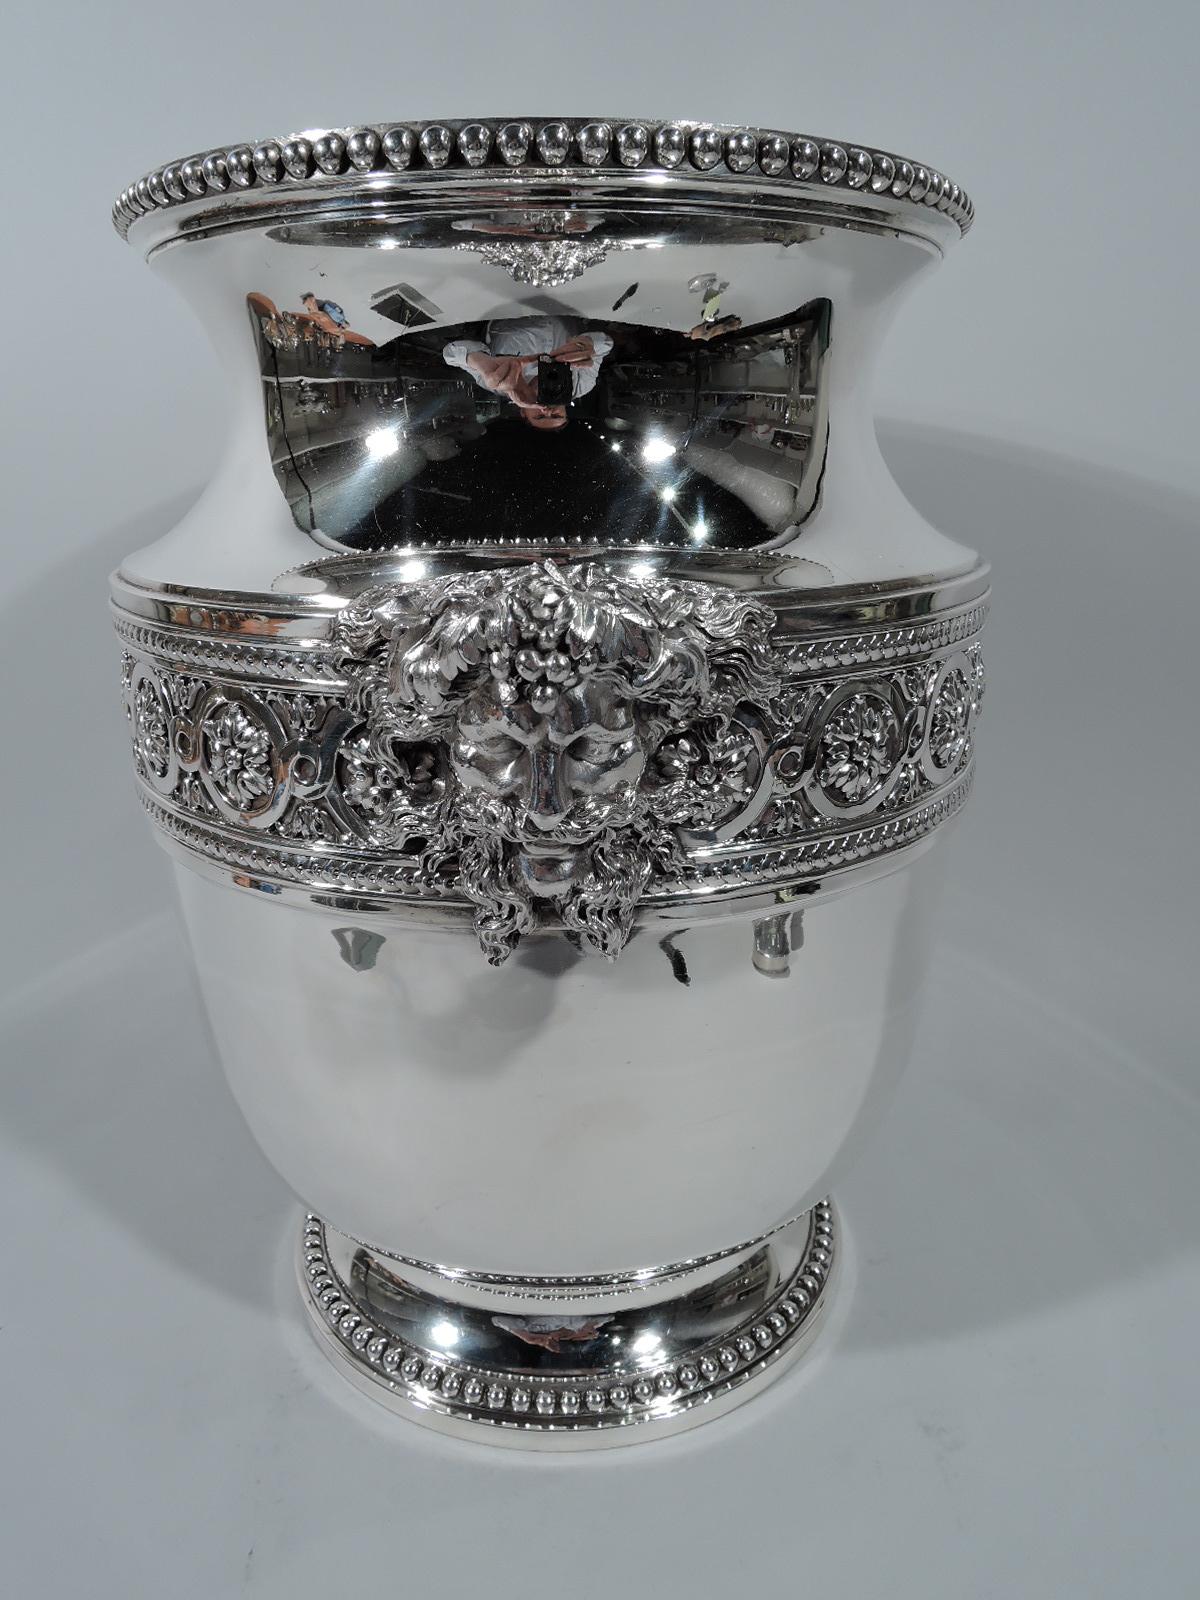 Belle Epoque 950 silver wine cooler. Made by Ravinet & D’Enfert in Paris. Urn with raised foot and flared rim. Chased band with rosette-inset guilloche band between threaded-disc borders. Beaded rims. Substantial and restrained with a suggestion of